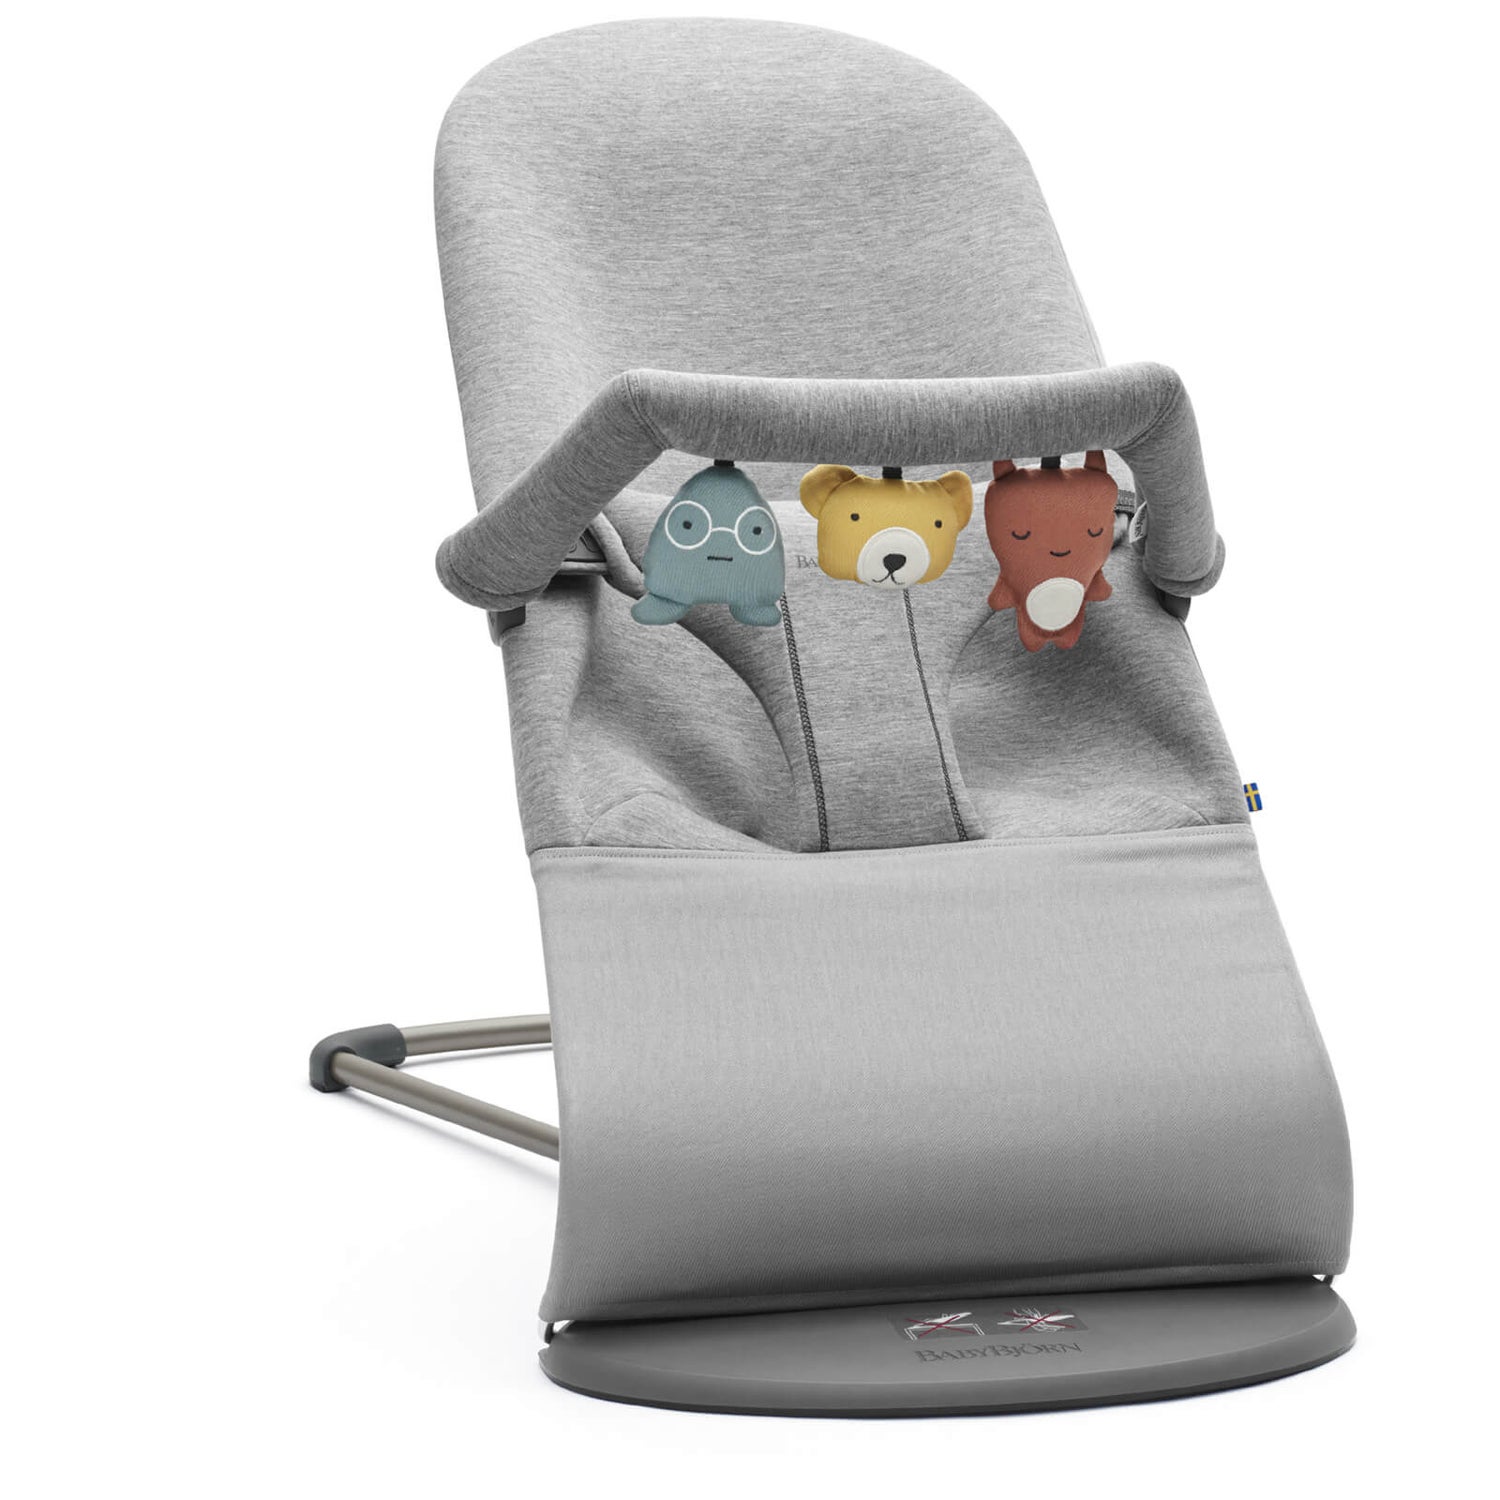 BABYBJÖRN Bouncer Bliss and Soft Friends Bouncer Toy - Light Grey